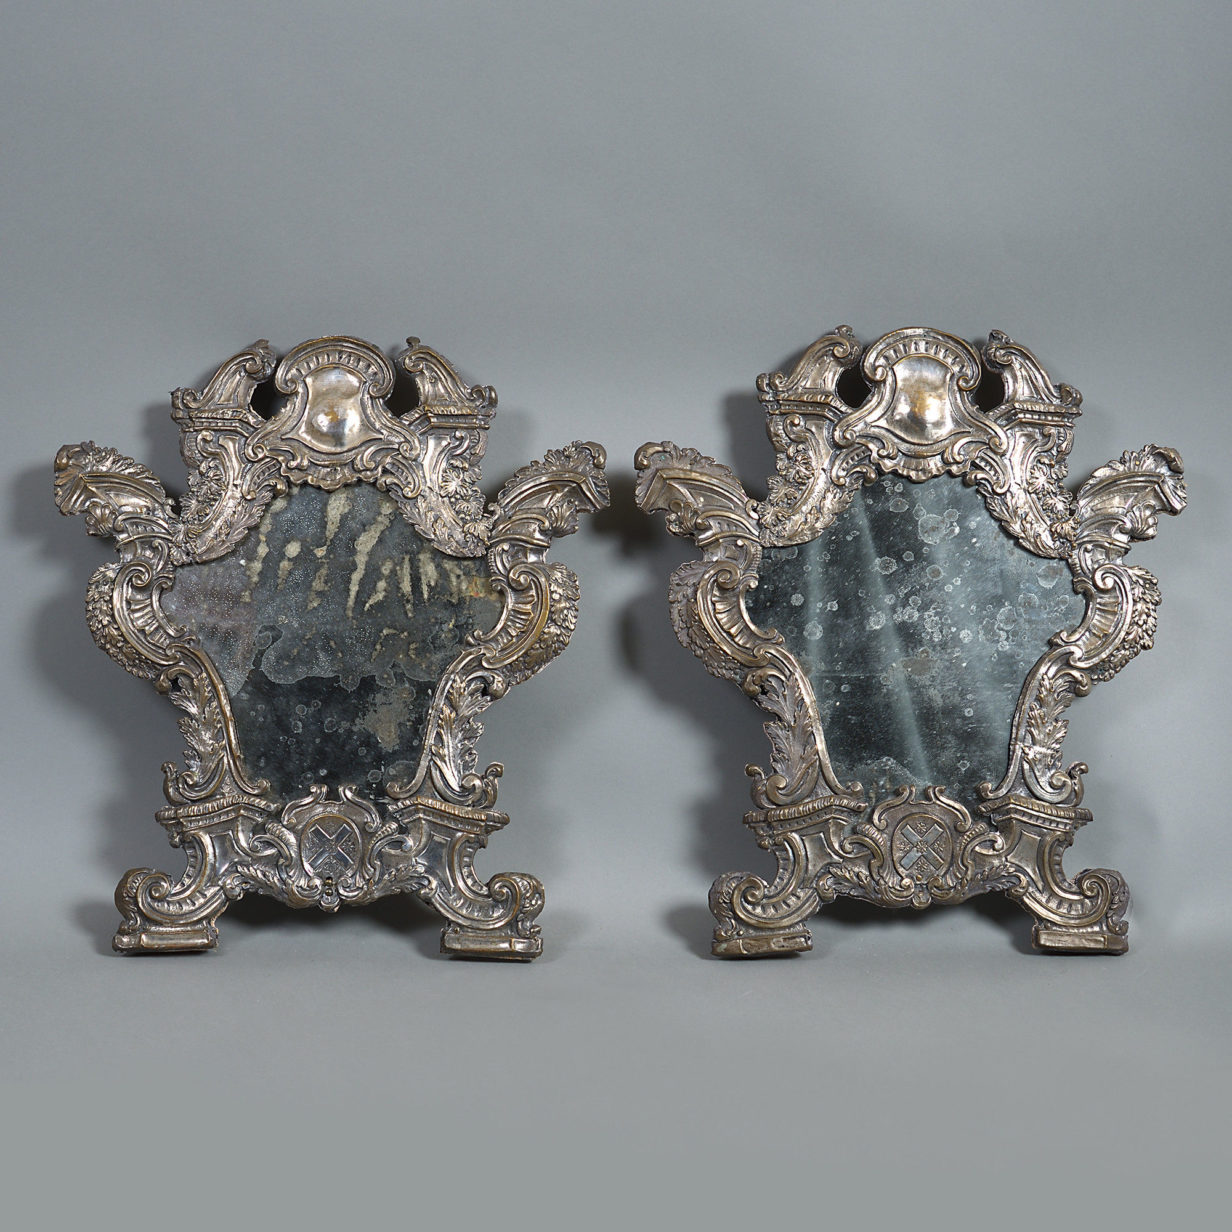 A rare 18th century pair of silvered wall mirrors